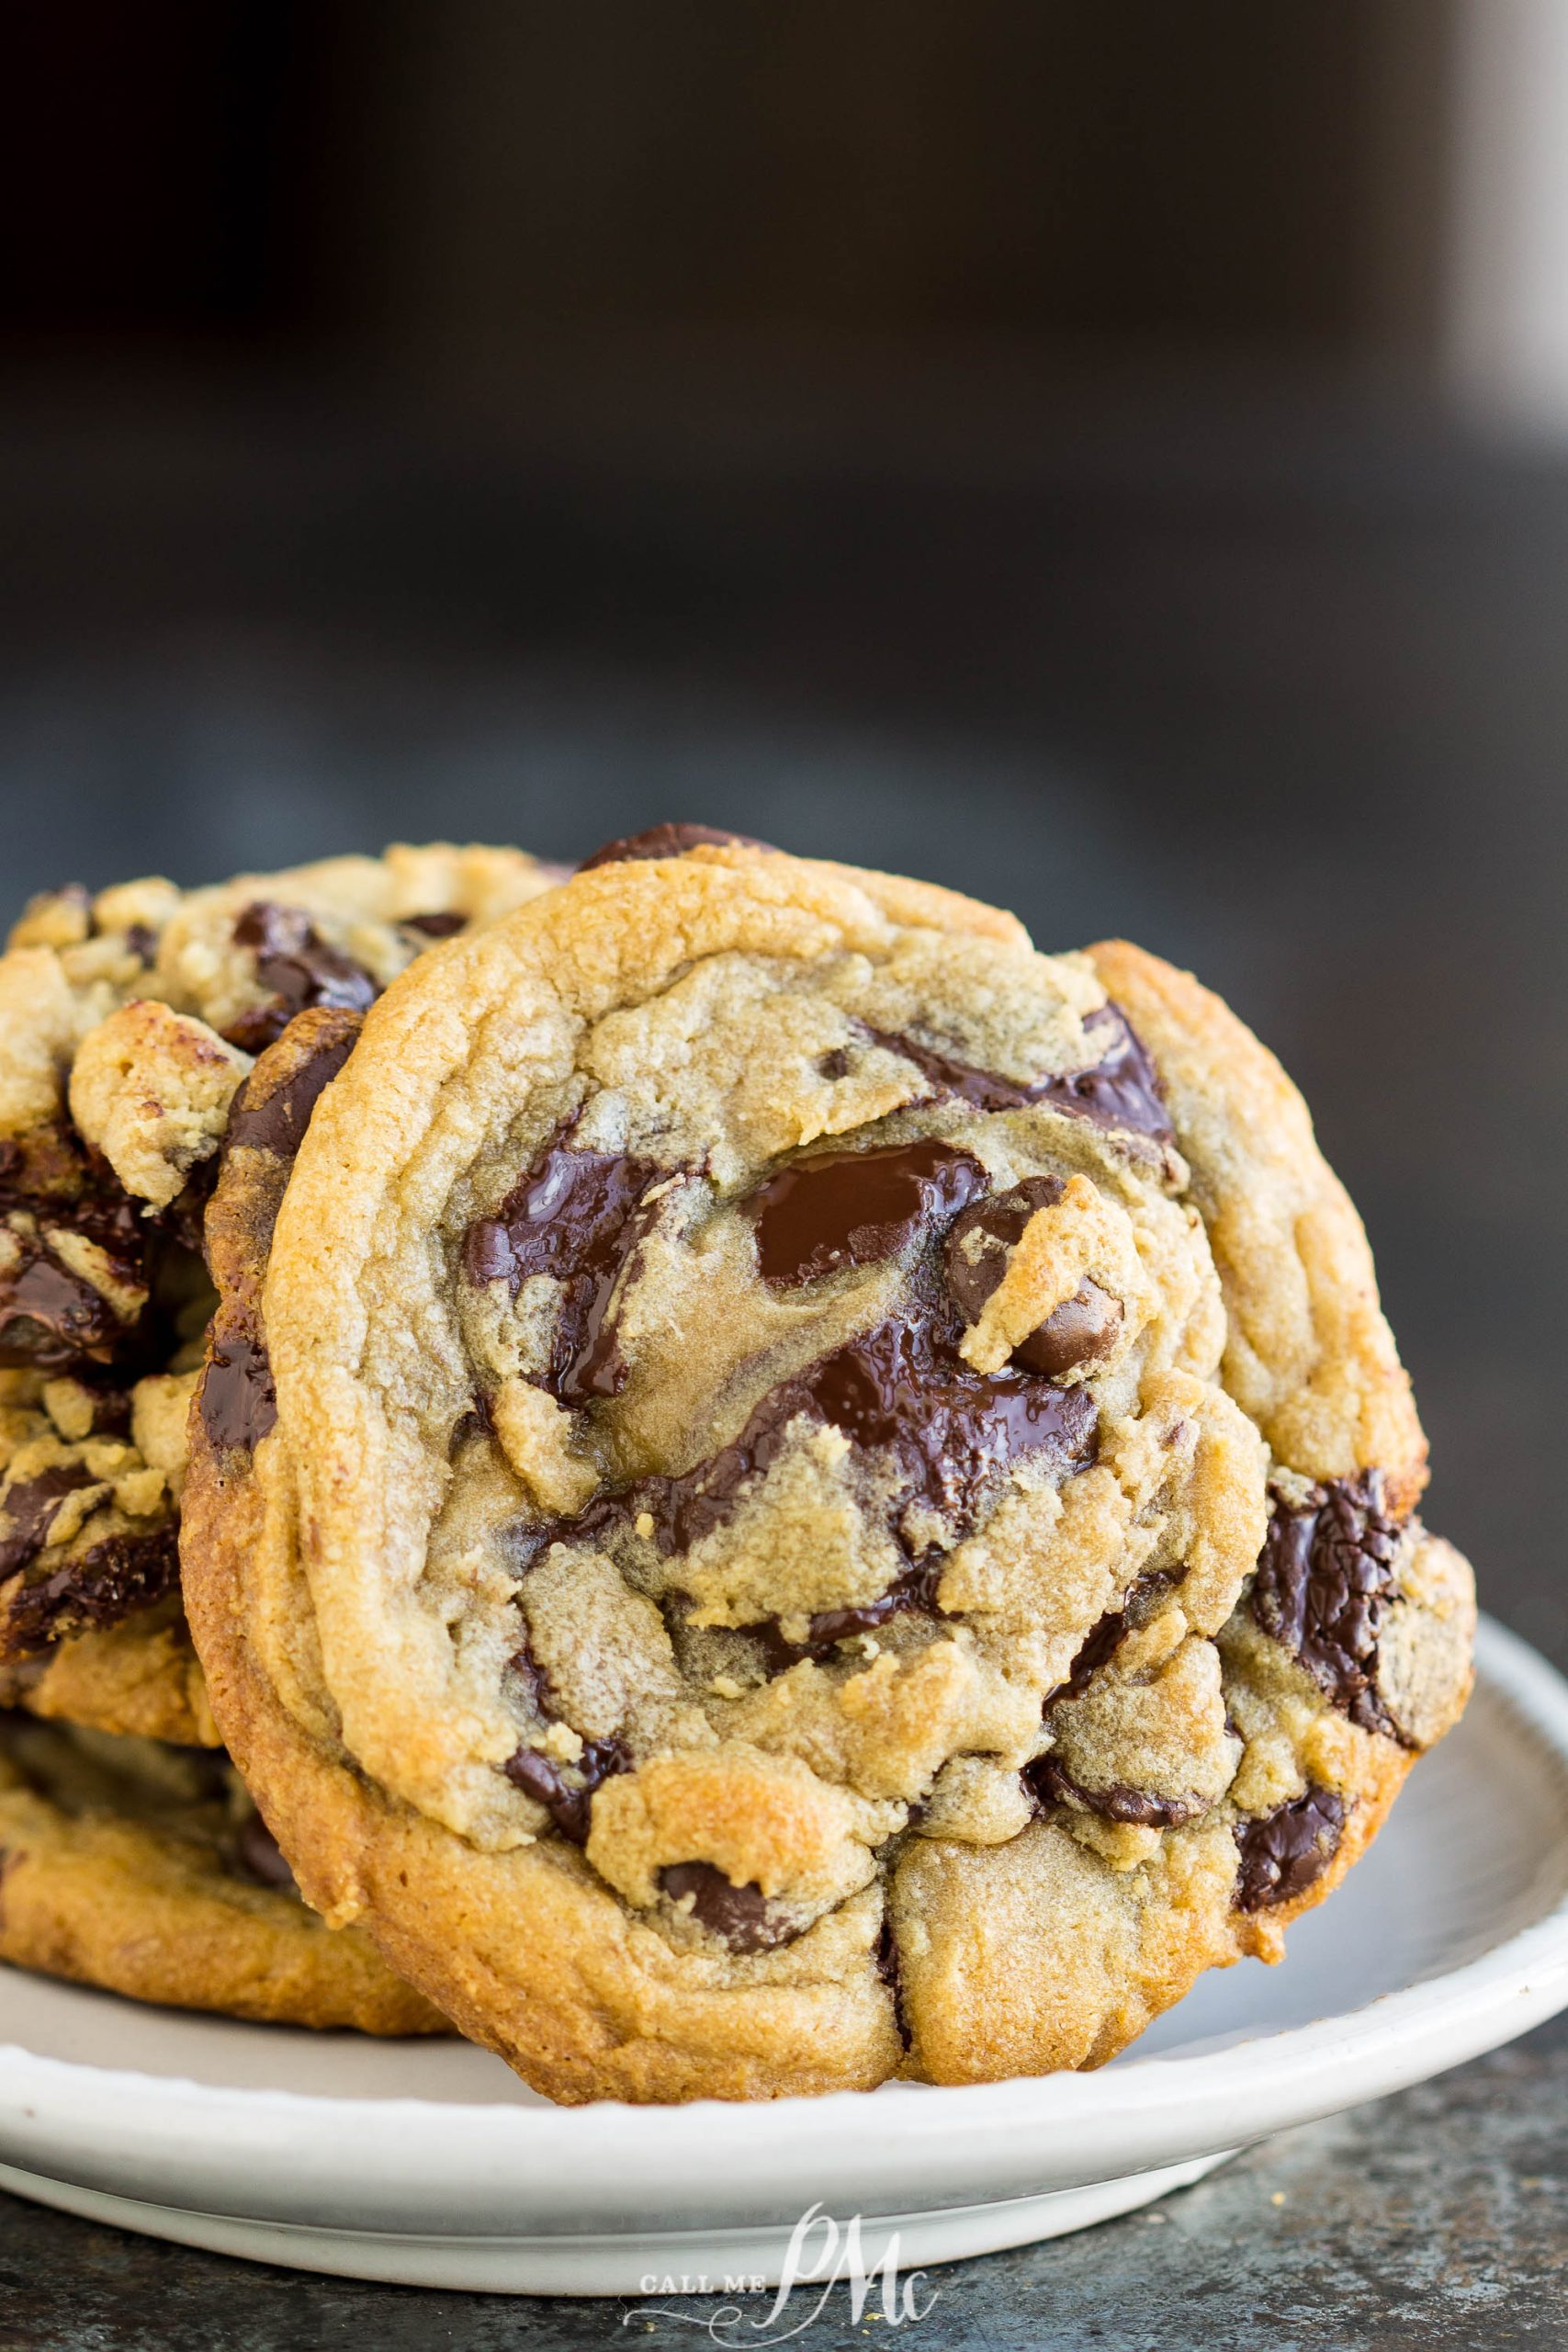 Thick Chocolate Chip Snickers Cookies